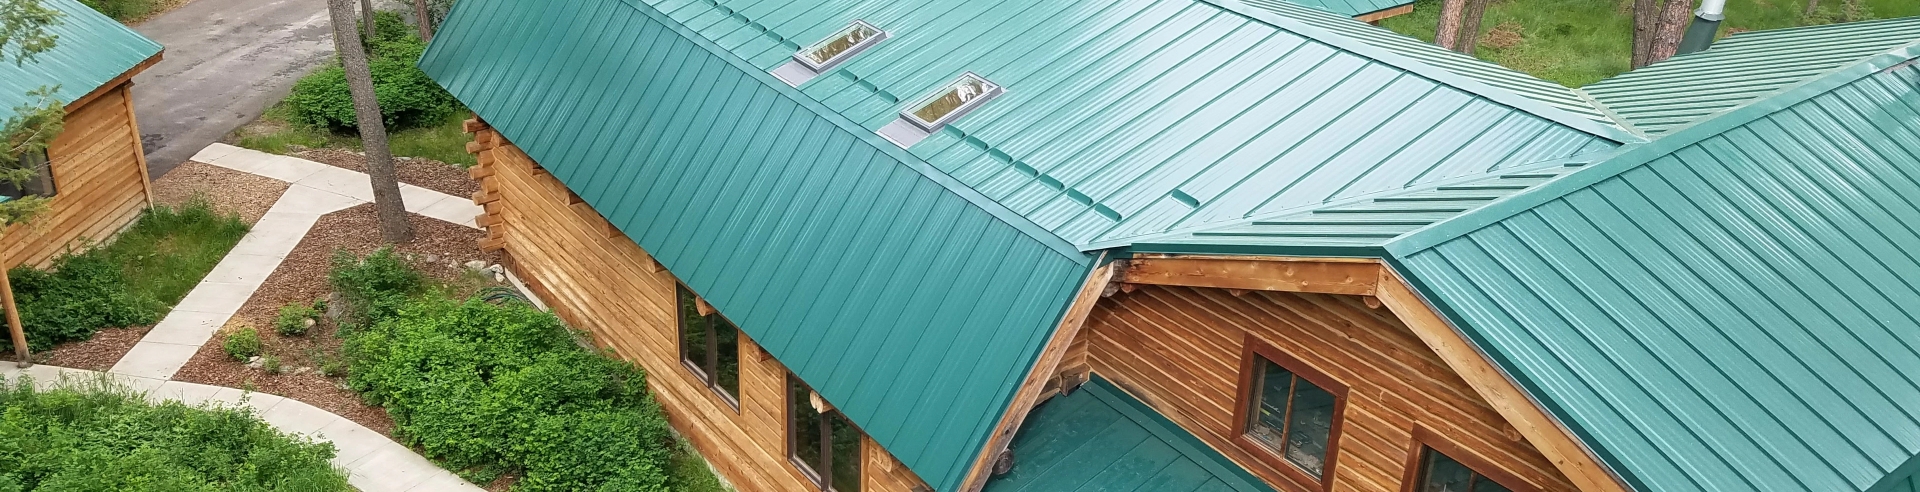 New Green standing seam roof on log home